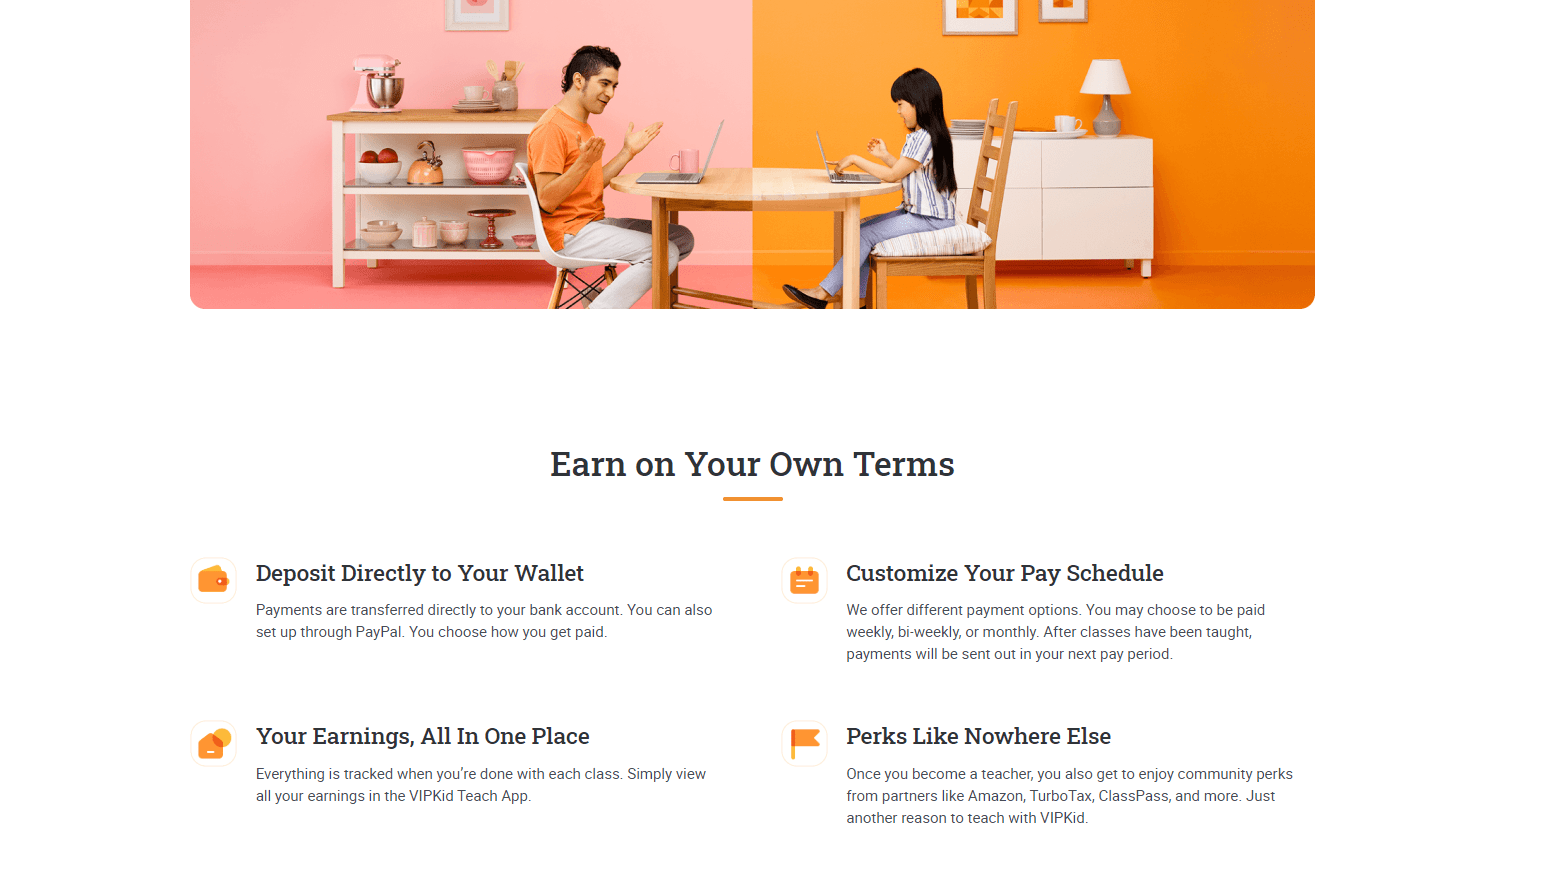 earn on your terms - VIPKid